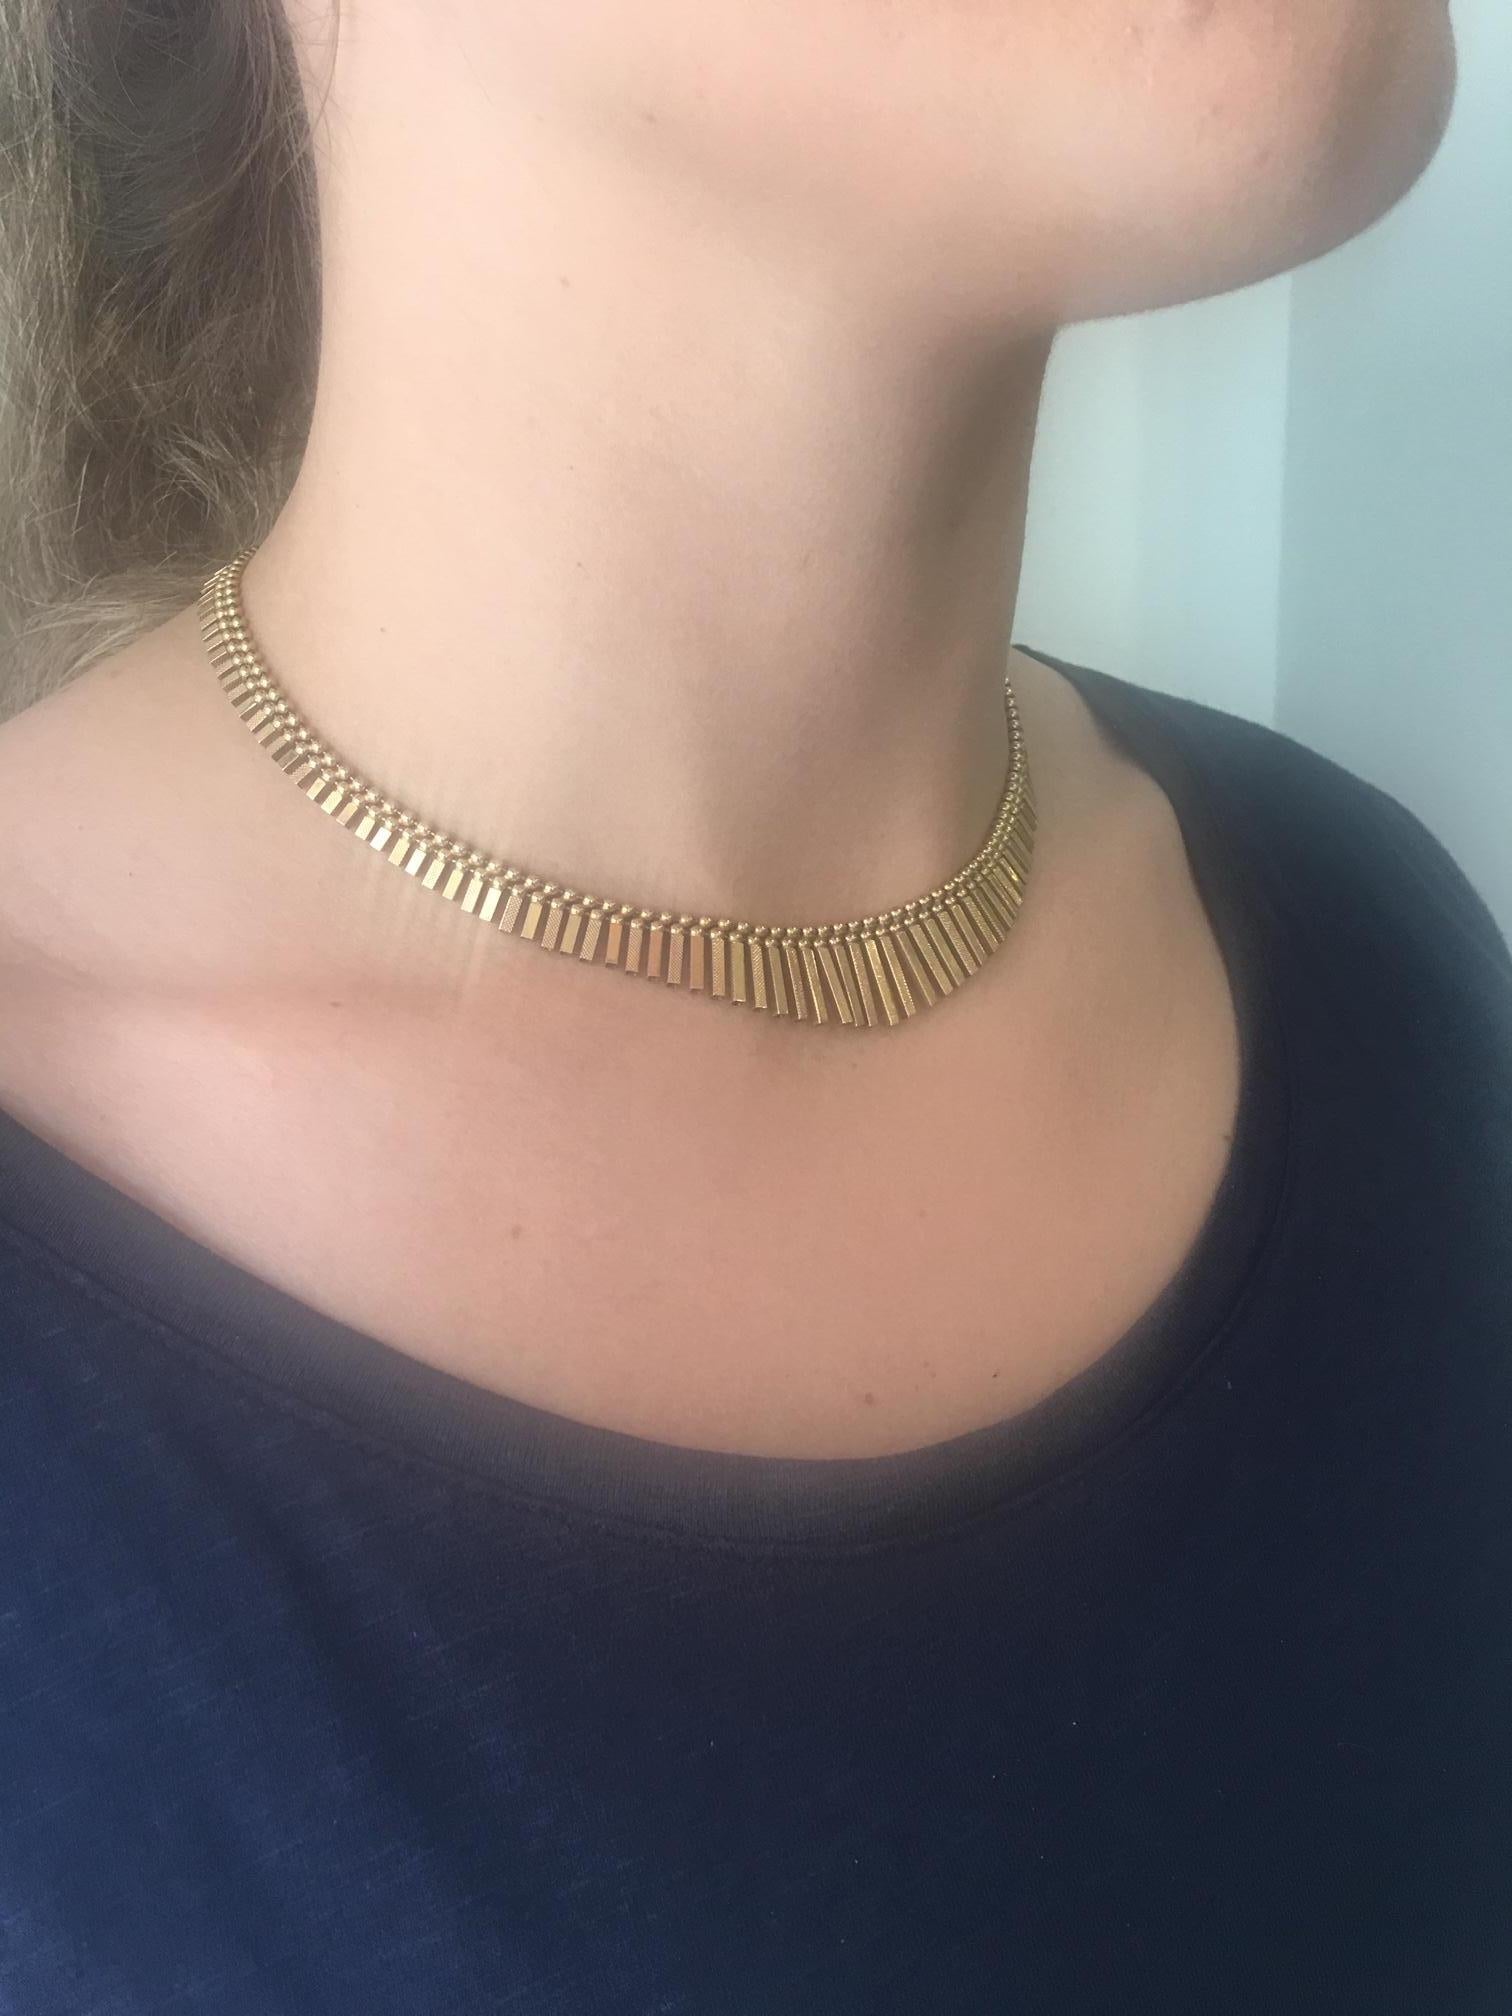 Feel like an Egyptian goddess with this 18k gold Cleopatra style tapered necklace; graduated flat bars define the beauty of this lovely necklace, hand crafted in 18k gold, secure invisible insertion clasp with a figure 8 safety. Hallmarked 18K 750